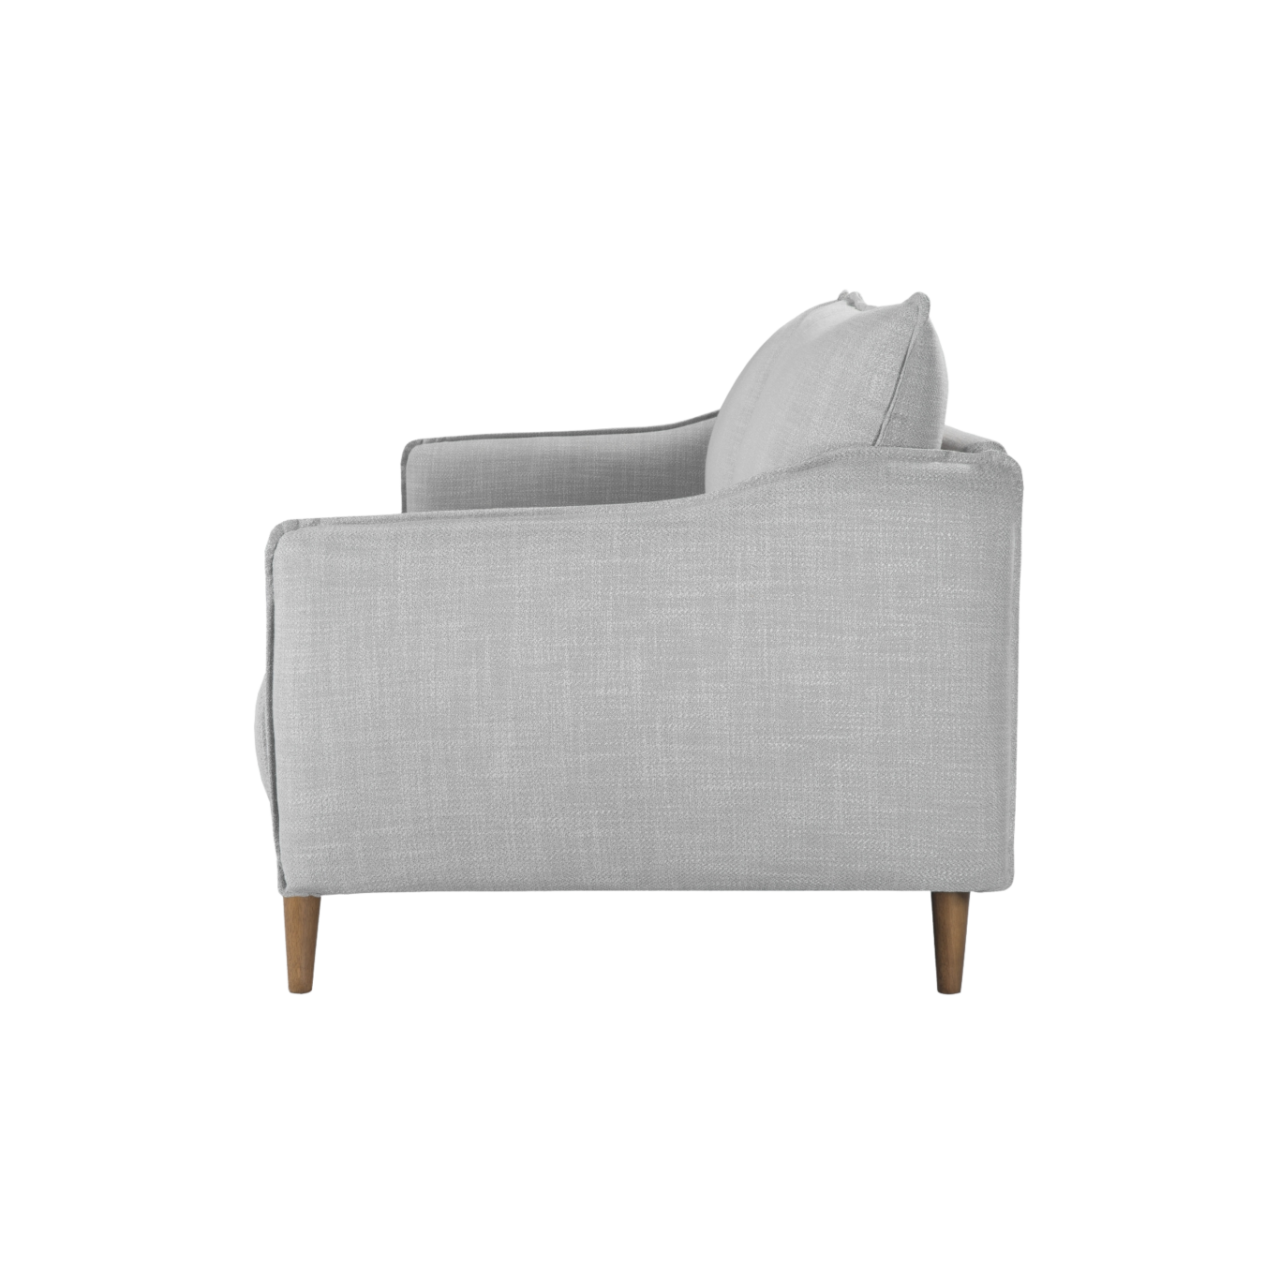 side view of modern comfy 3 seater sofa upholstered in grey linen fabric